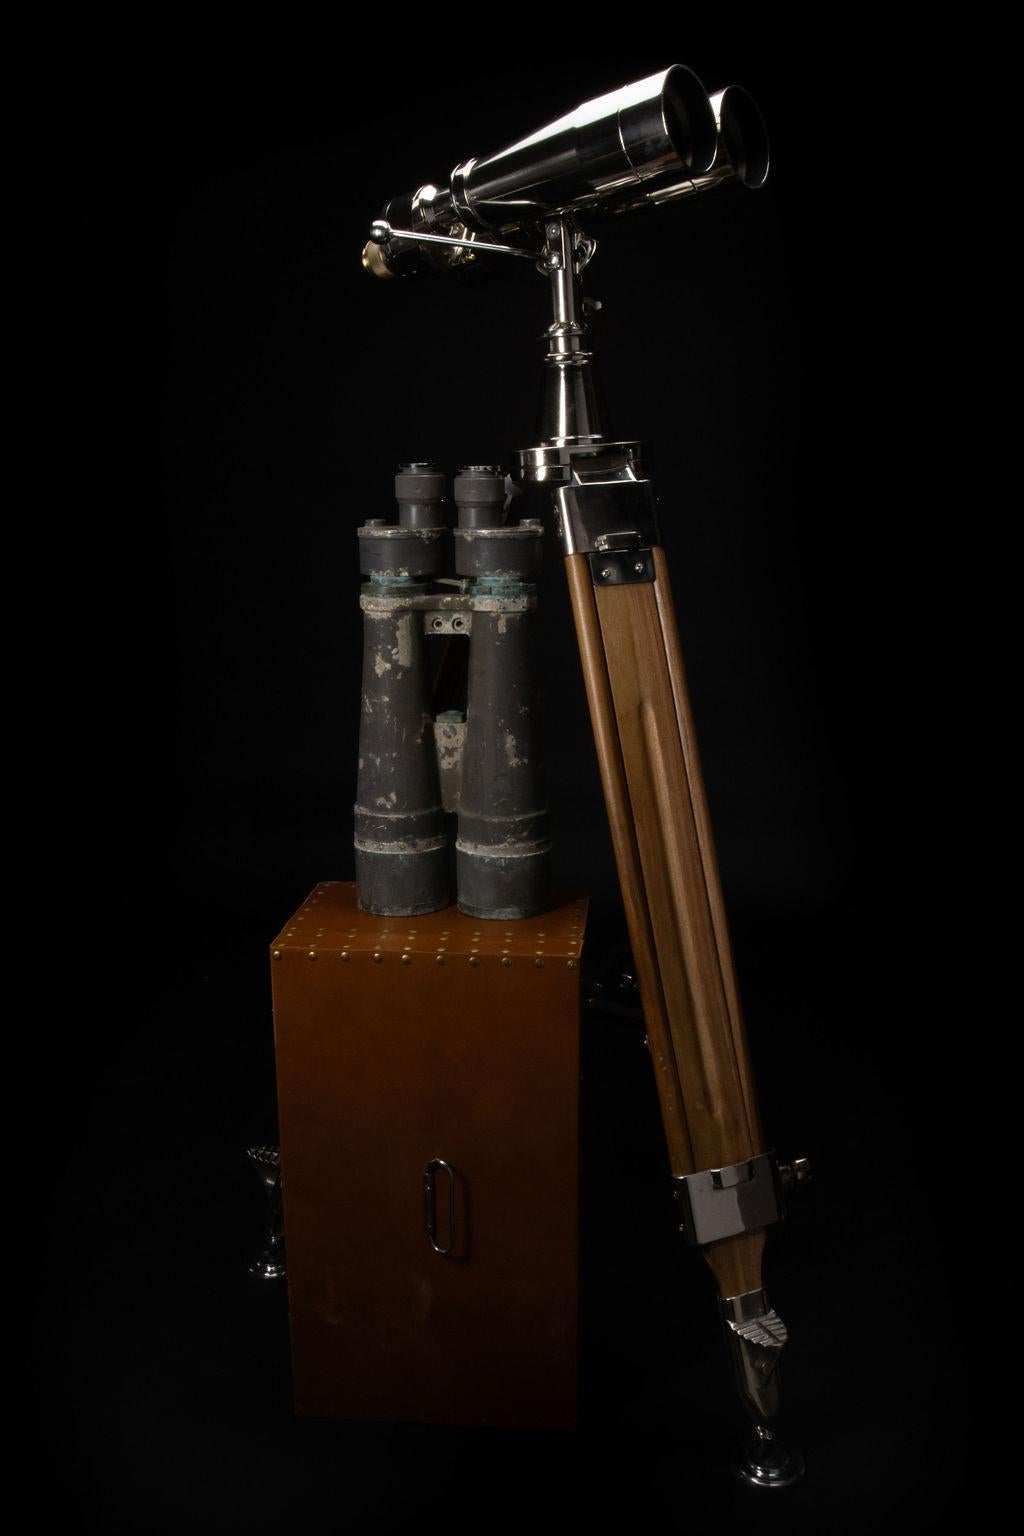 Nikon marine binoculars mounted on a wooden period tripod, these exceptional binoculars display entirely Original optics in a distinctly Japanese bulletproof straight-body instrument with 15 x magnification with 80 mm objective naval lens that have